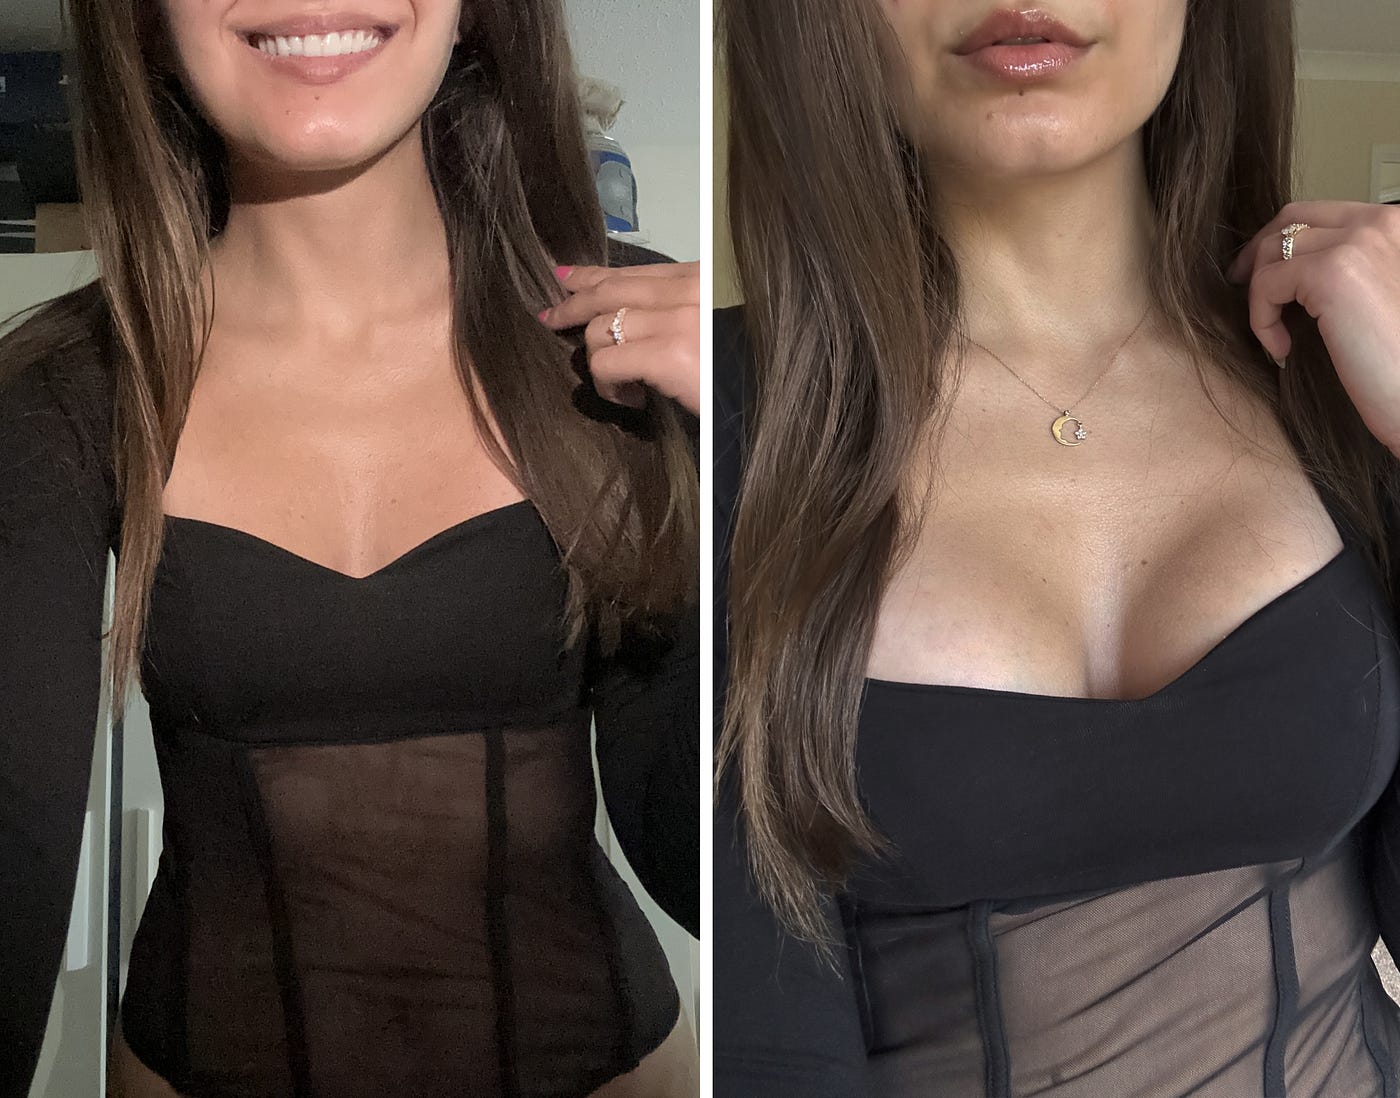 I had a boob job - but now I don't know if I should wear this top in  public